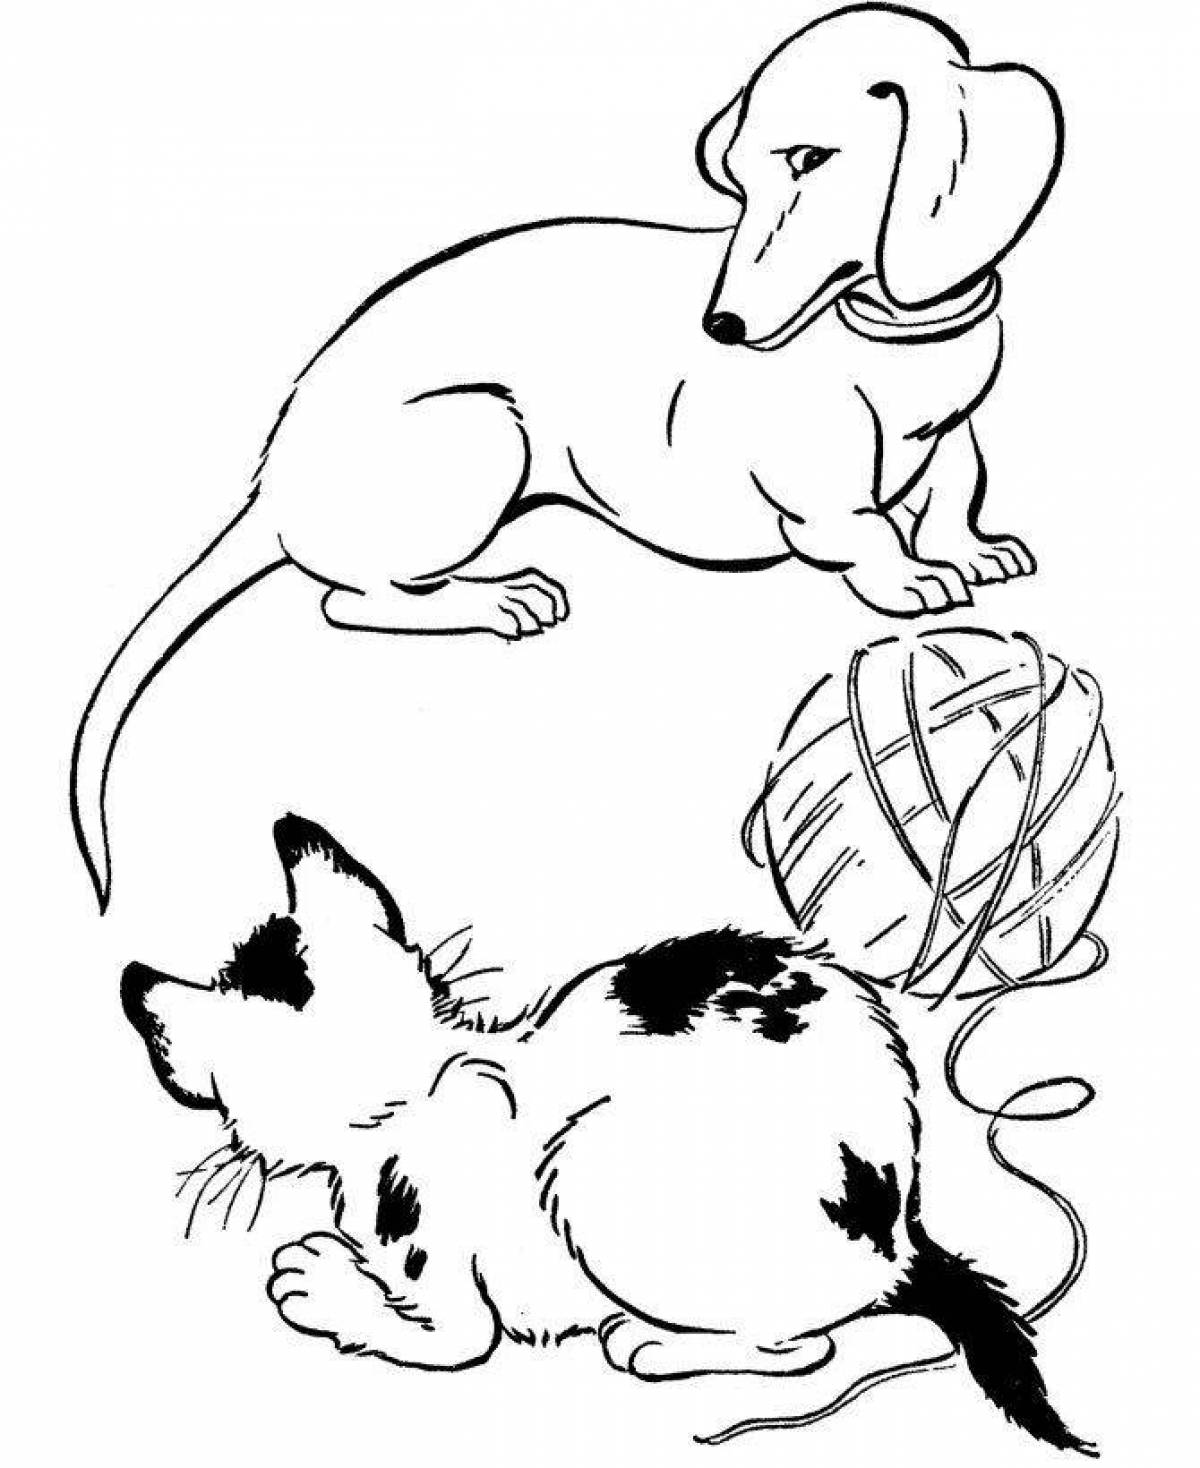 Coloring page bubble cat and dog